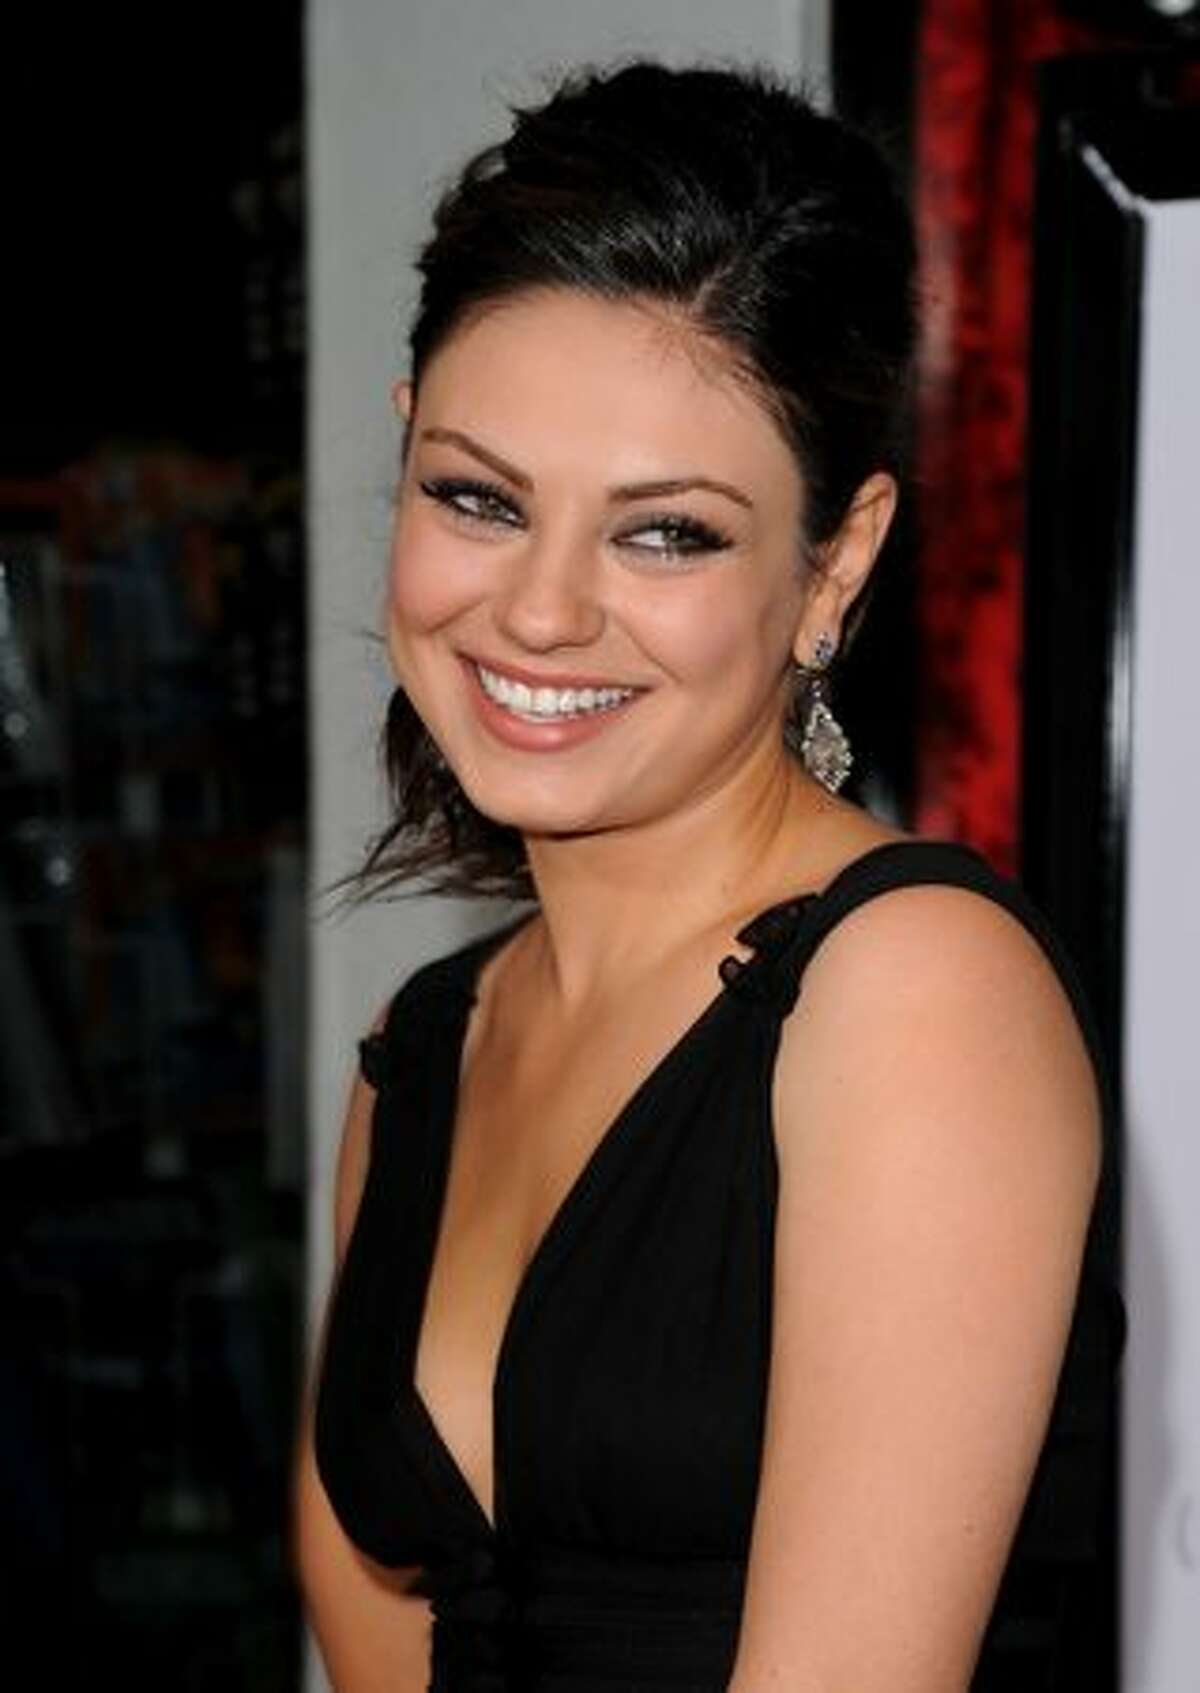 Actress Mila Kunis arrives at the "Black Swan" closing night gala during AFI FEST 2010 presented by Audi held at Grauman's Chinese Theatre in Hollywood, California.